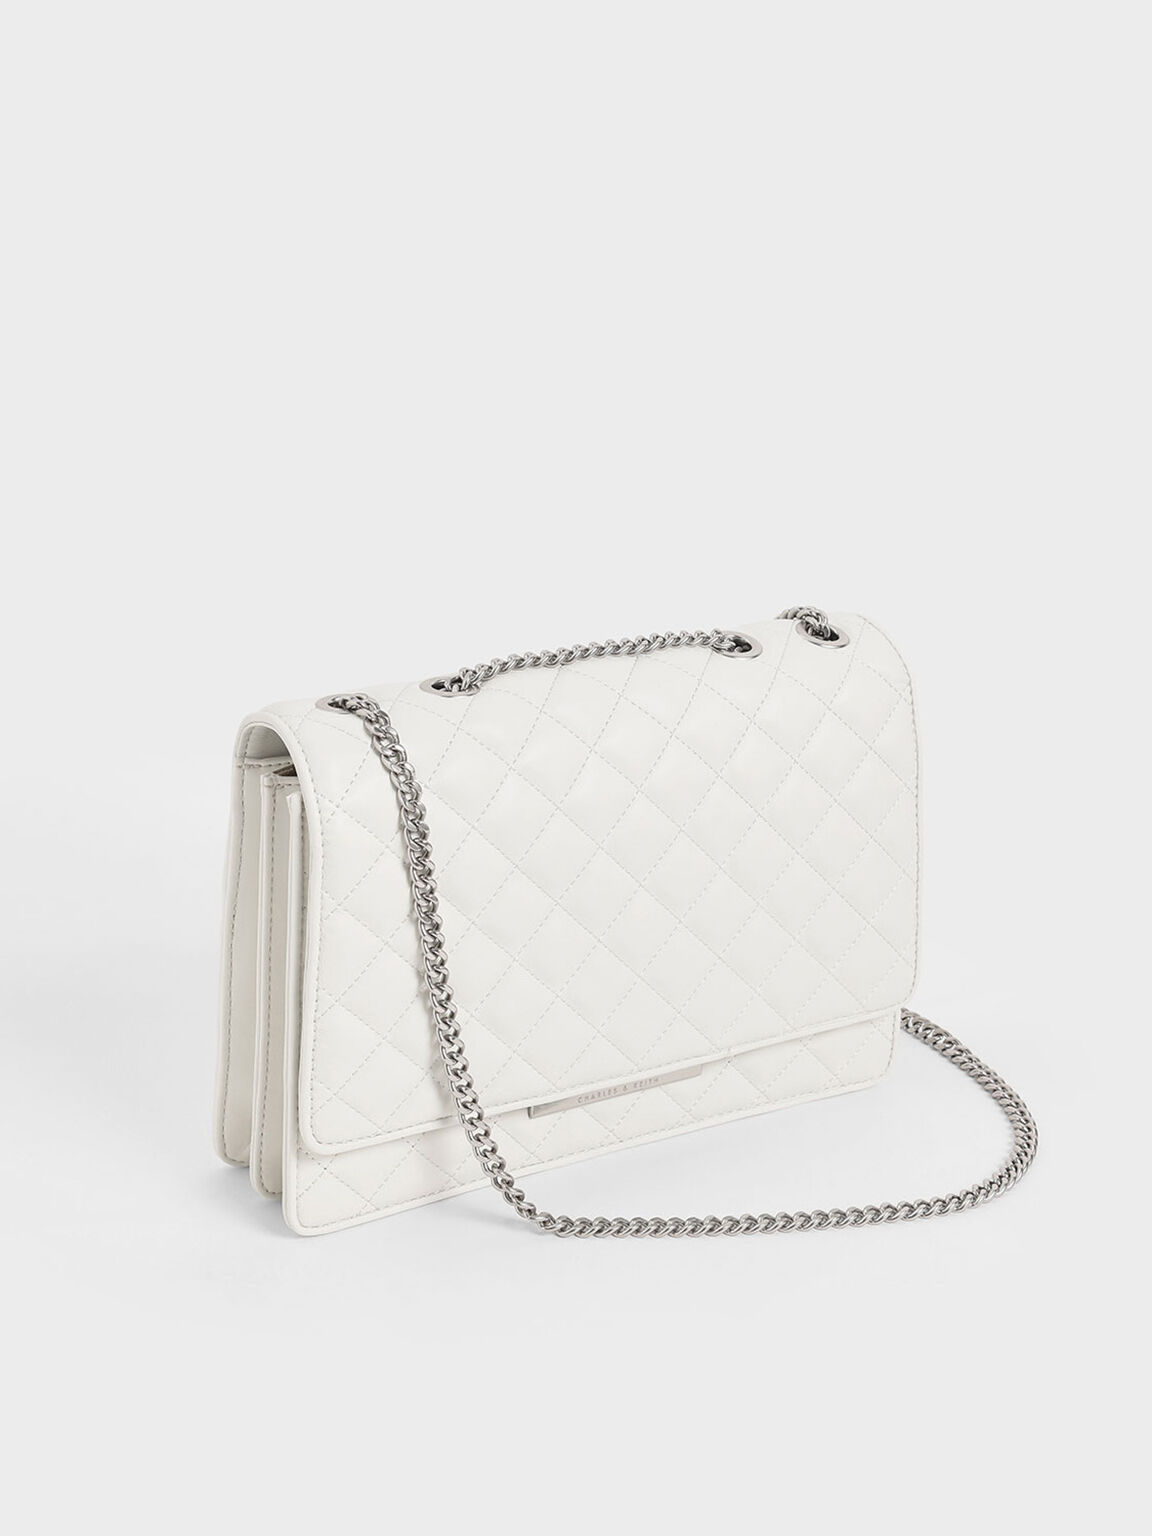 Tas Bahu Quilted Chain Strap, White, hi-res